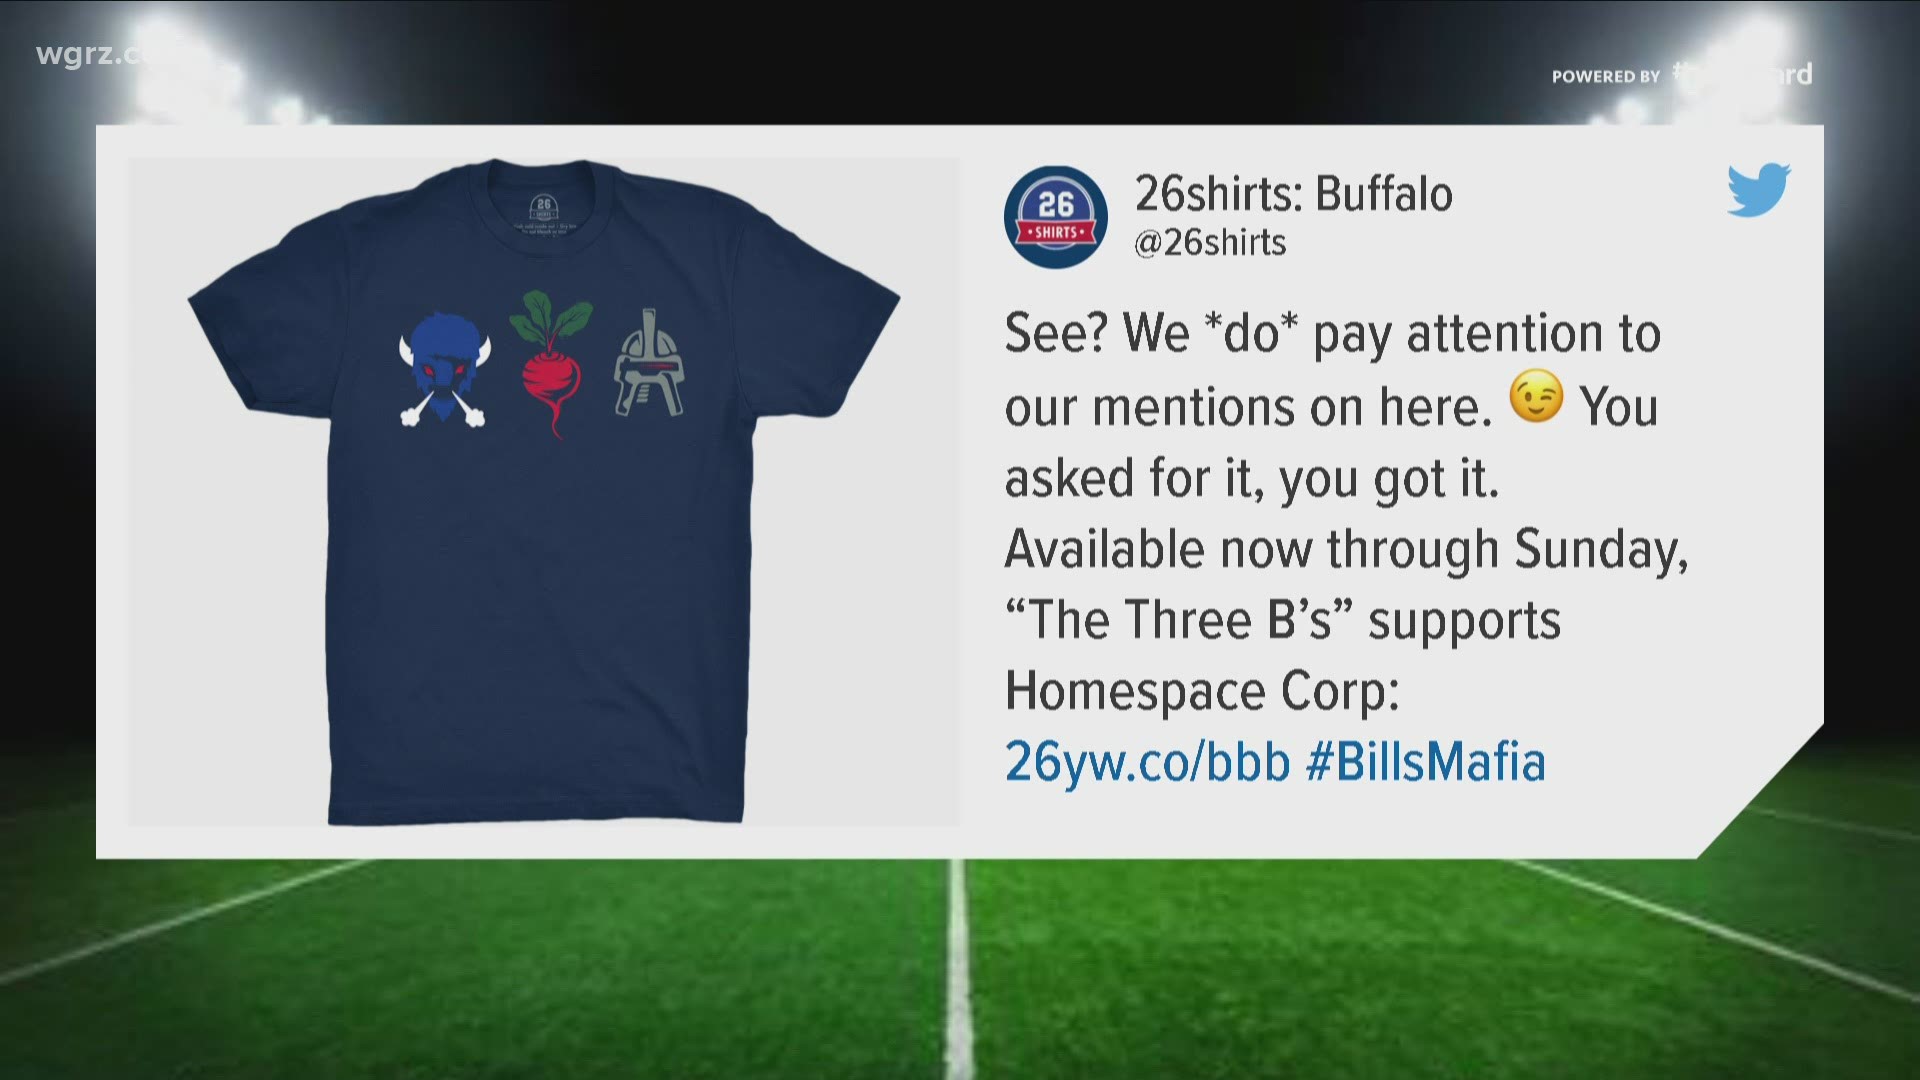 26 Shirts to sell gear celebrating Blue Jays playing in Buffalo